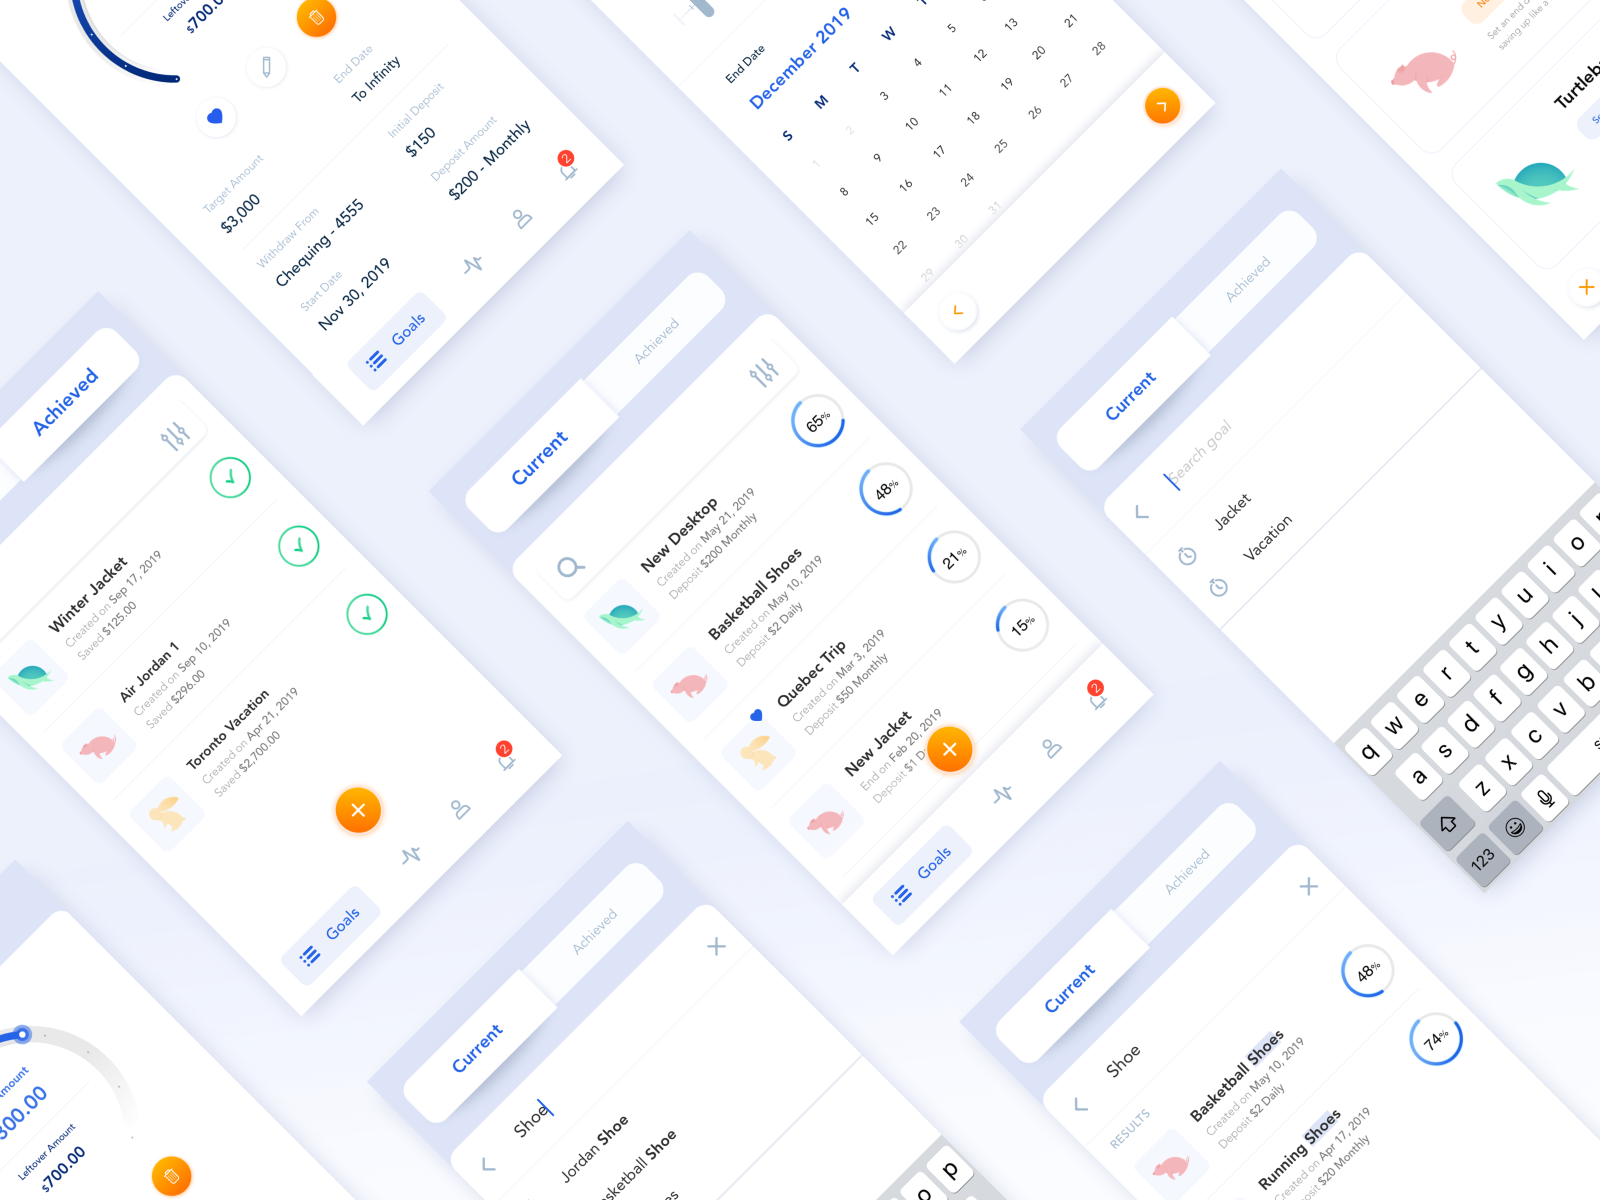 Financial Goals Management App Screens by Dai Nguyen on Dribbble